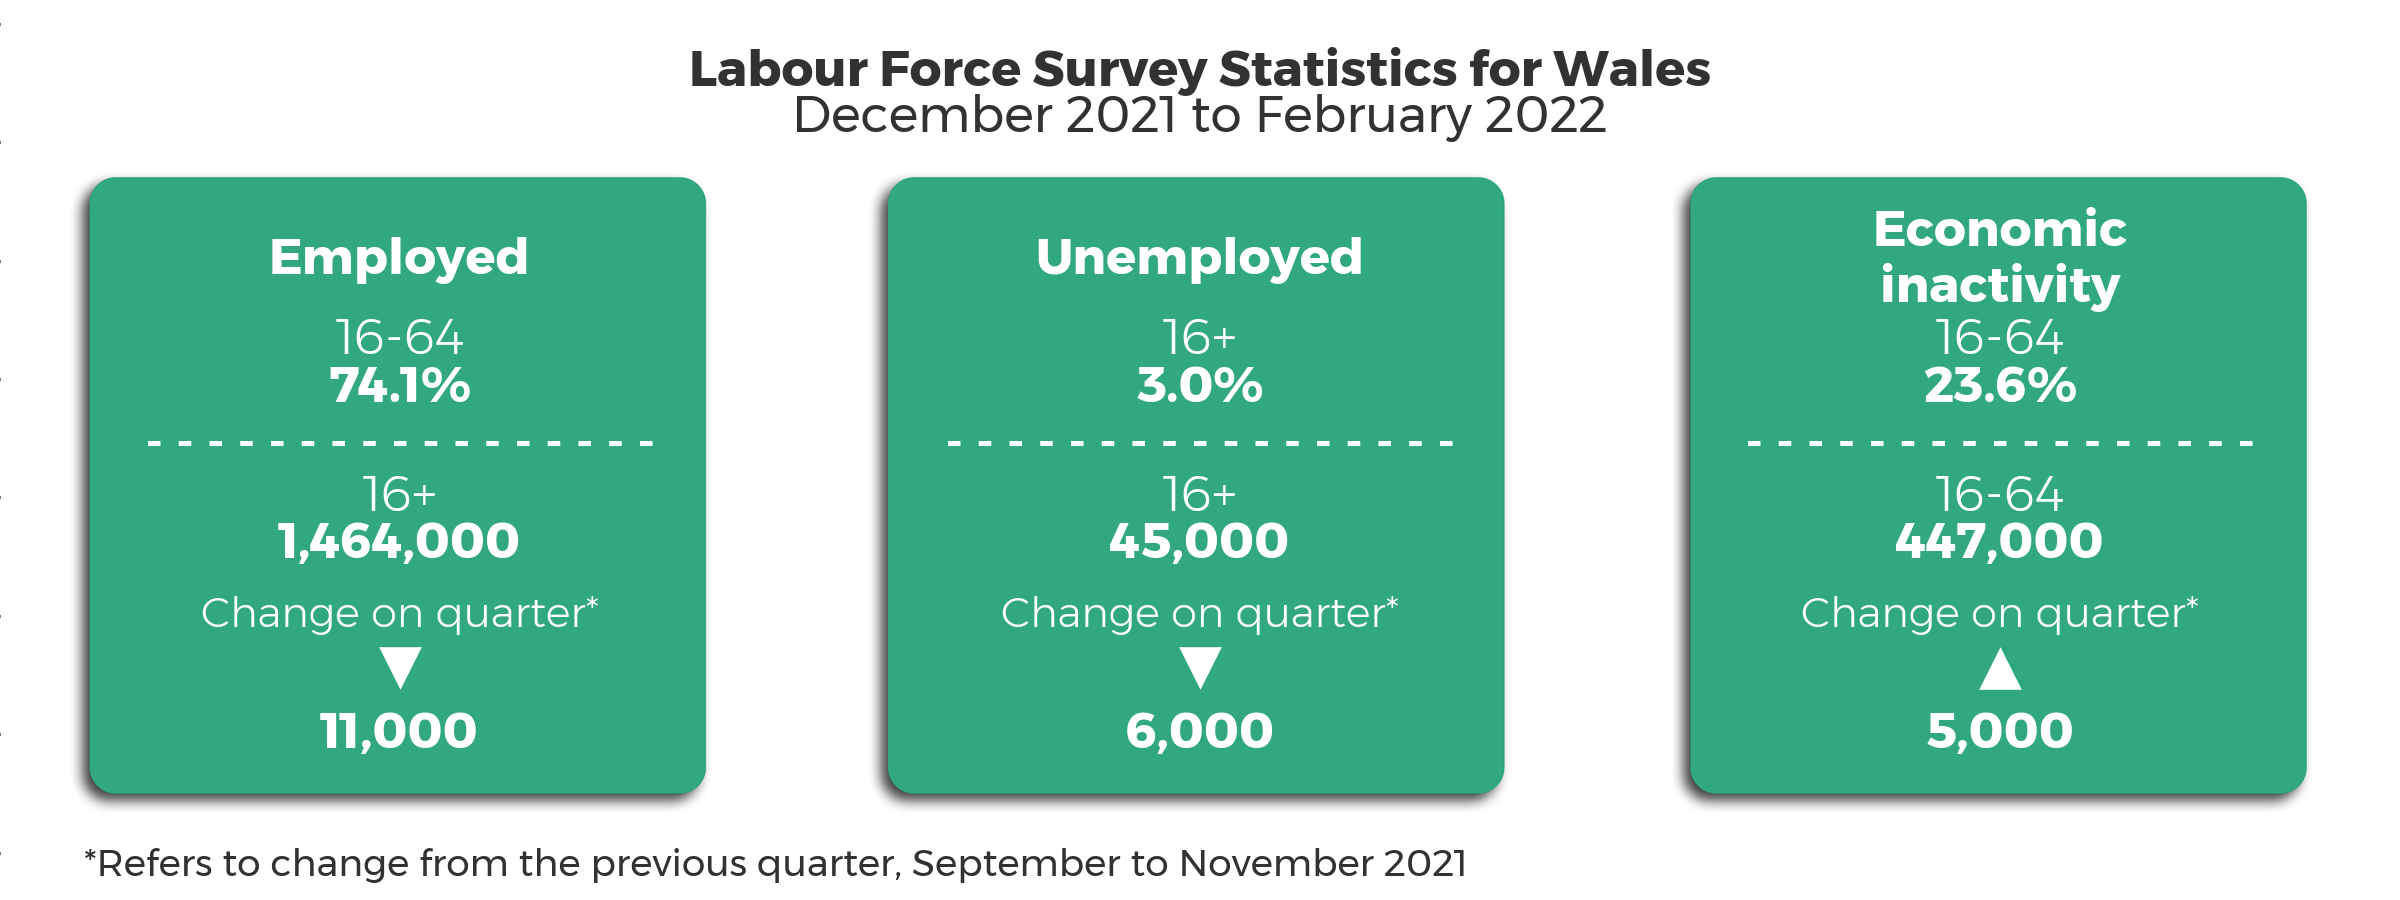 Headline statistics December 2021 to February 2022 compared to the previous quarter September 2021 to November 2021. The 16+ unemployment rate is 3.0% with 45,000 people unemployed, a decrease of 6,000 from the previous quarter. The 16-64 employment rate is 74.1%. 1,464,000 people aged 16+ employed, a decrease of 11,000 from the previous quarter. The 16-64 economic inactivity rate is 23.6% with 447,000 people economically inactive, an increase of 5,000 on the previous quarter.